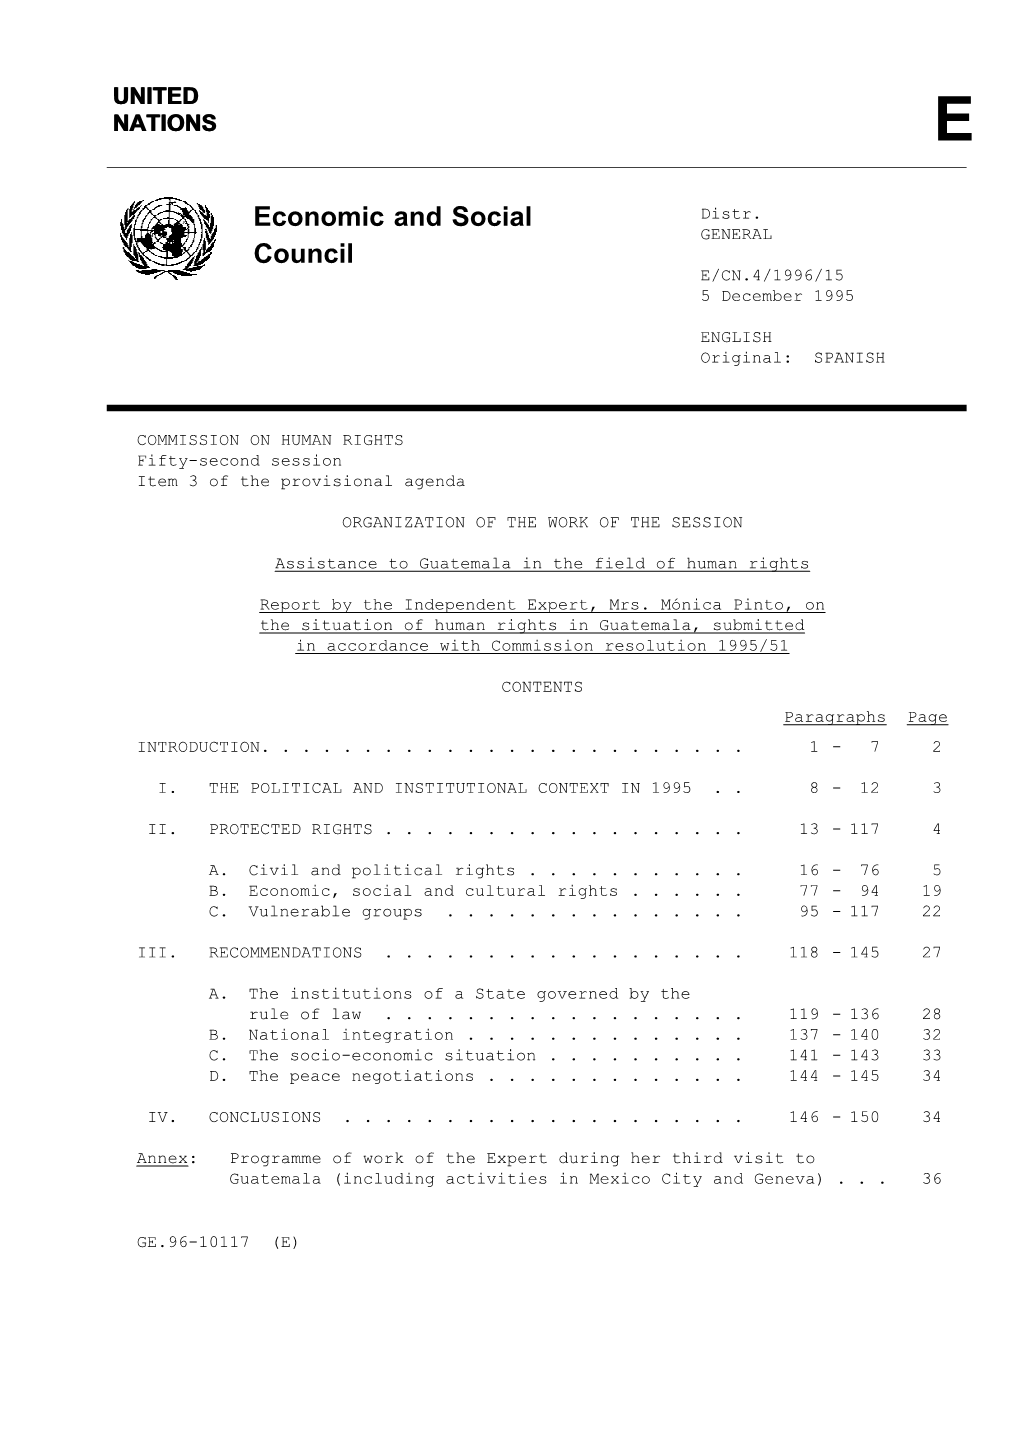 Economic and Social Council Decisions 1994/257 and 1995/268, As Requested by the Commission on Human Rights in Resolutions 1994/58 and 1995/51